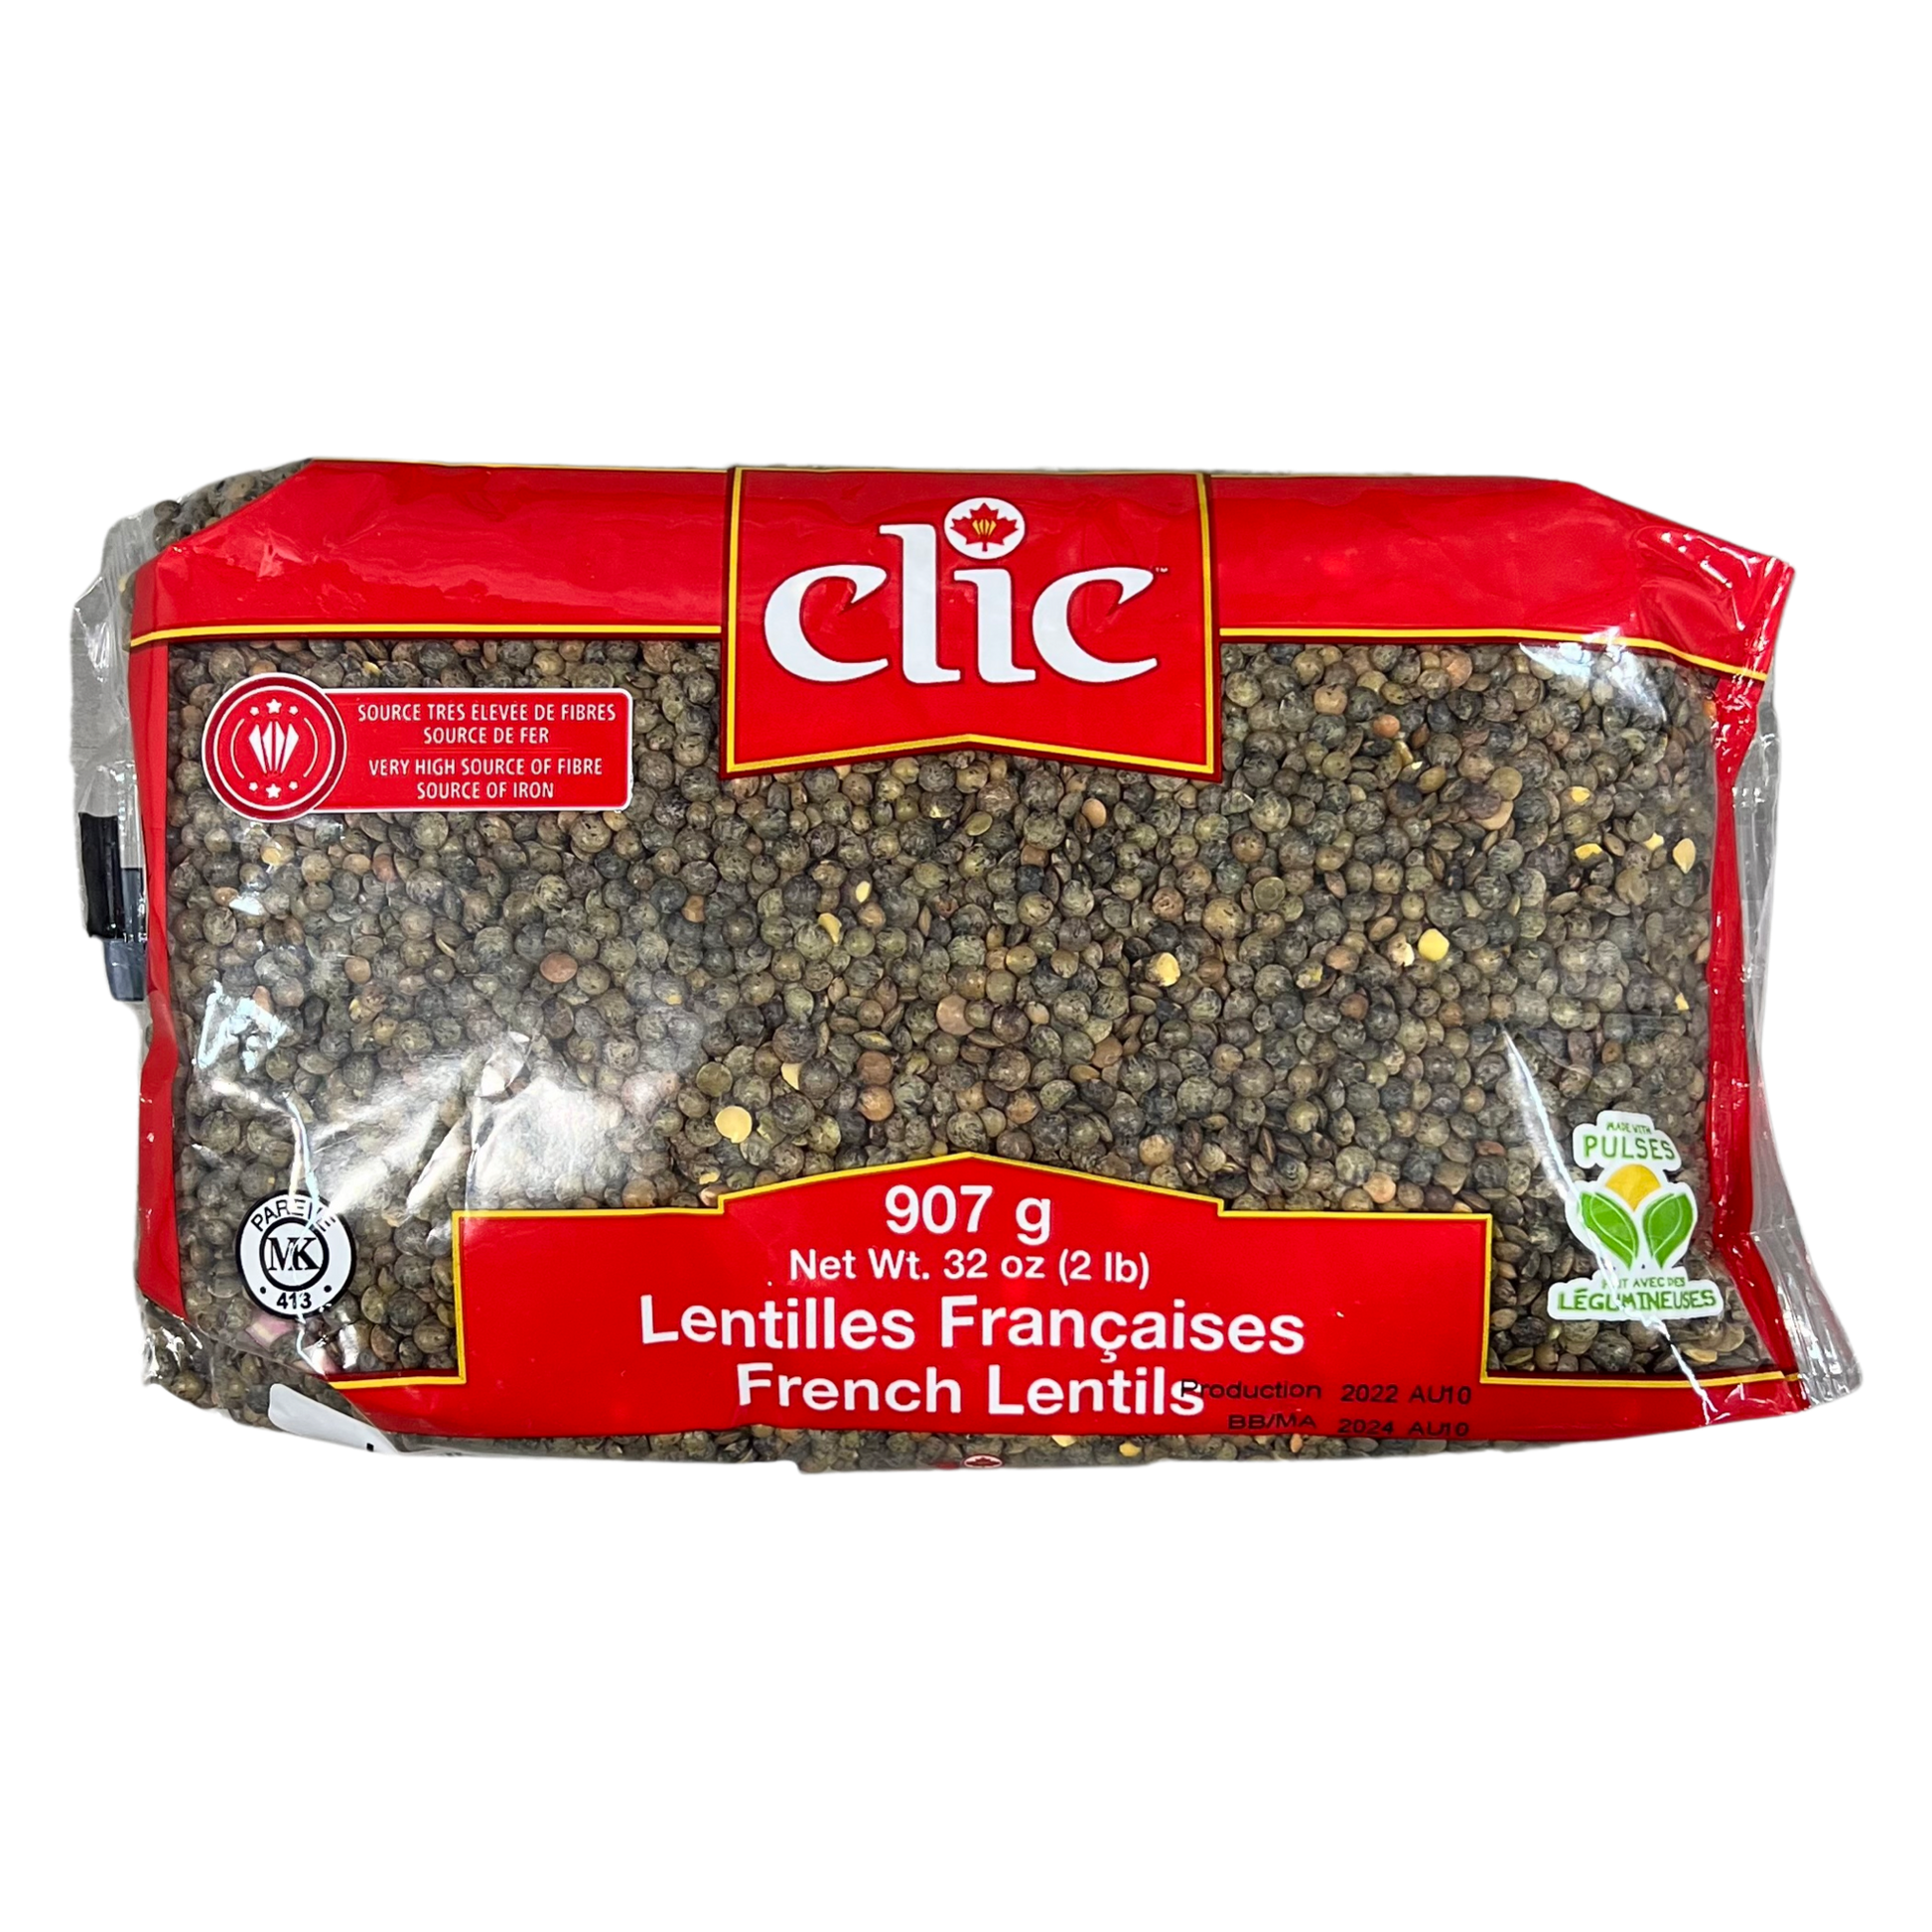 Clic French Lentils 2 Lbs Sirprize